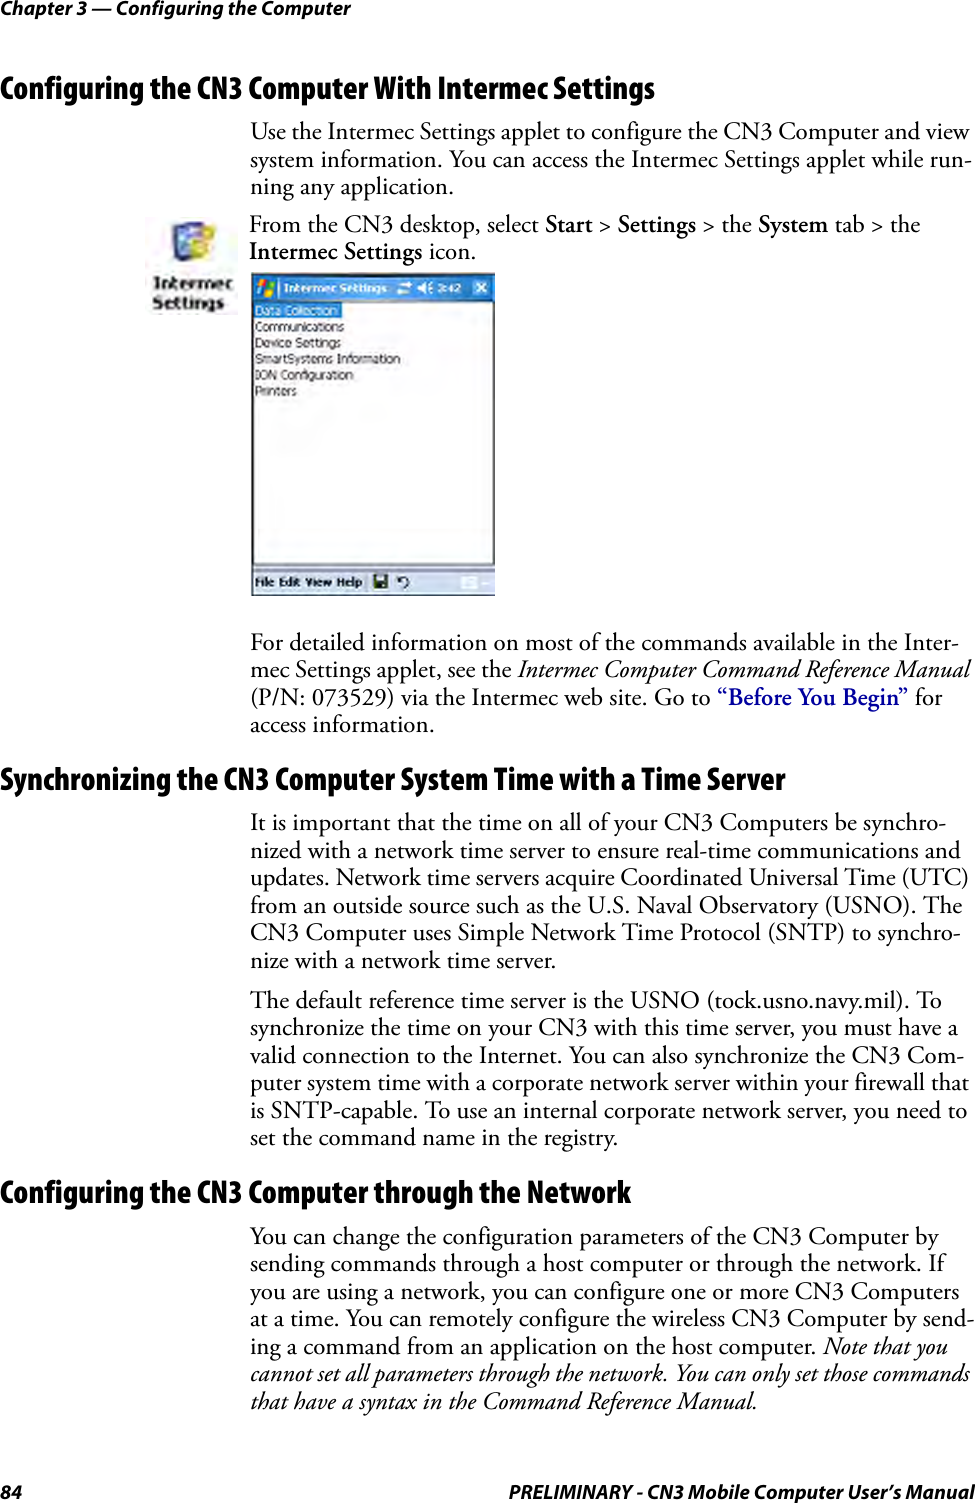 Chapter 3 — Configuring the Computer84 PRELIMINARY - CN3 Mobile Computer User’s ManualConfiguring the CN3 Computer With Intermec SettingsUse the Intermec Settings applet to configure the CN3 Computer and view system information. You can access the Intermec Settings applet while run-ning any application.For detailed information on most of the commands available in the Inter-mec Settings applet, see the Intermec Computer Command Reference Manual (P/N: 073529) via the Intermec web site. Go to “Before You Begin” for access information.Synchronizing the CN3 Computer System Time with a Time ServerIt is important that the time on all of your CN3 Computers be synchro-nized with a network time server to ensure real-time communications and updates. Network time servers acquire Coordinated Universal Time (UTC) from an outside source such as the U.S. Naval Observatory (USNO). The CN3 Computer uses Simple Network Time Protocol (SNTP) to synchro-nize with a network time server.The default reference time server is the USNO (tock.usno.navy.mil). To synchronize the time on your CN3 with this time server, you must have a valid connection to the Internet. You can also synchronize the CN3 Com-puter system time with a corporate network server within your firewall that is SNTP-capable. To use an internal corporate network server, you need to set the command name in the registry.Configuring the CN3 Computer through the NetworkYou can change the configuration parameters of the CN3 Computer by sending commands through a host computer or through the network. If you are using a network, you can configure one or more CN3 Computers at a time. You can remotely configure the wireless CN3 Computer by send-ing a command from an application on the host computer. Note that you cannot set all parameters through the network. You can only set those commands that have a syntax in the Command Reference Manual.From the CN3 desktop, select Start &gt; Settings &gt; the System tab &gt; the Intermec Settings icon.